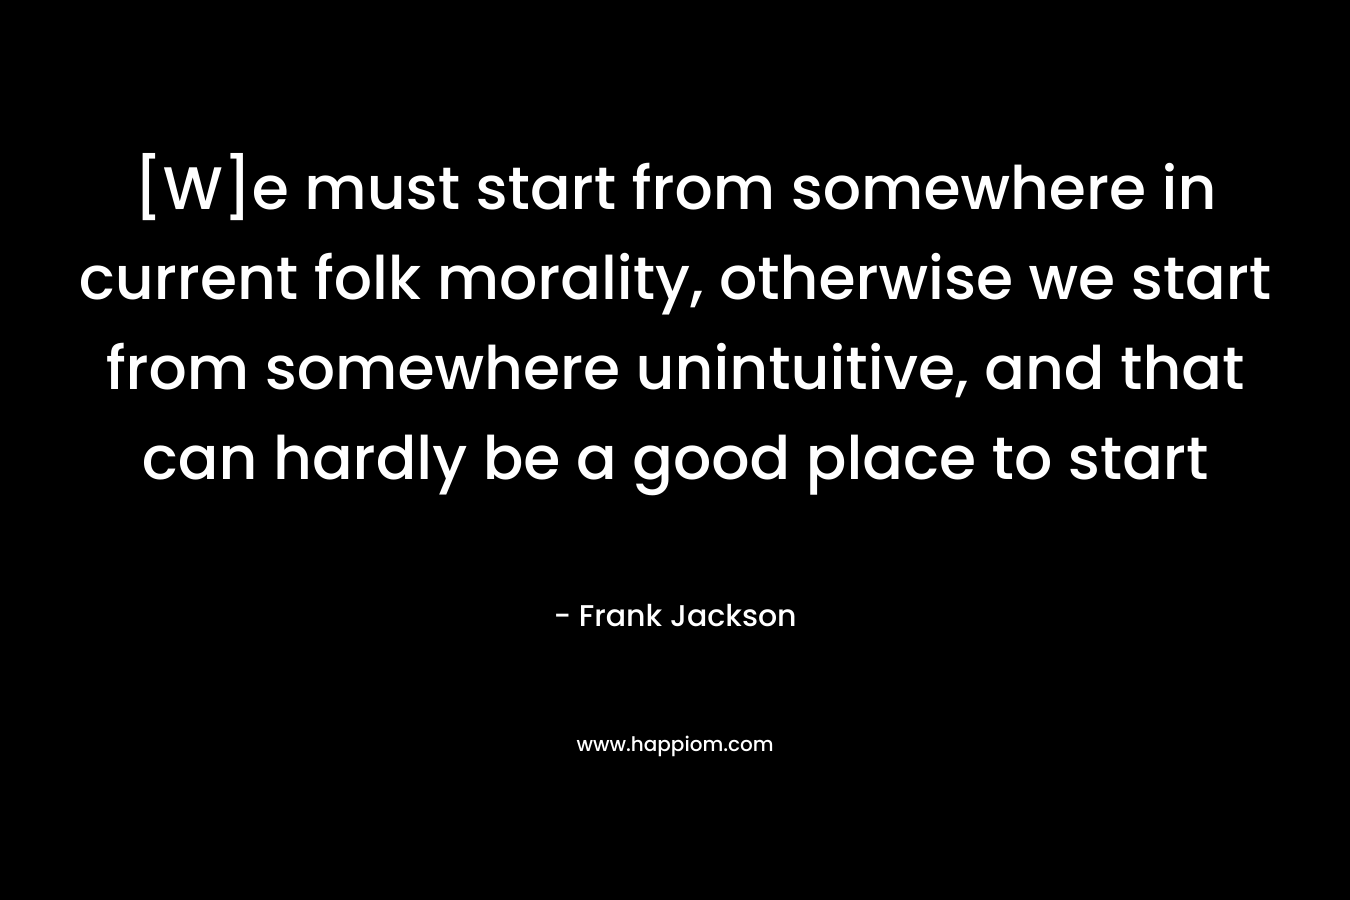 [W]e must start from somewhere in current folk morality, otherwise we start from somewhere unintuitive, and that can hardly be a good place to start